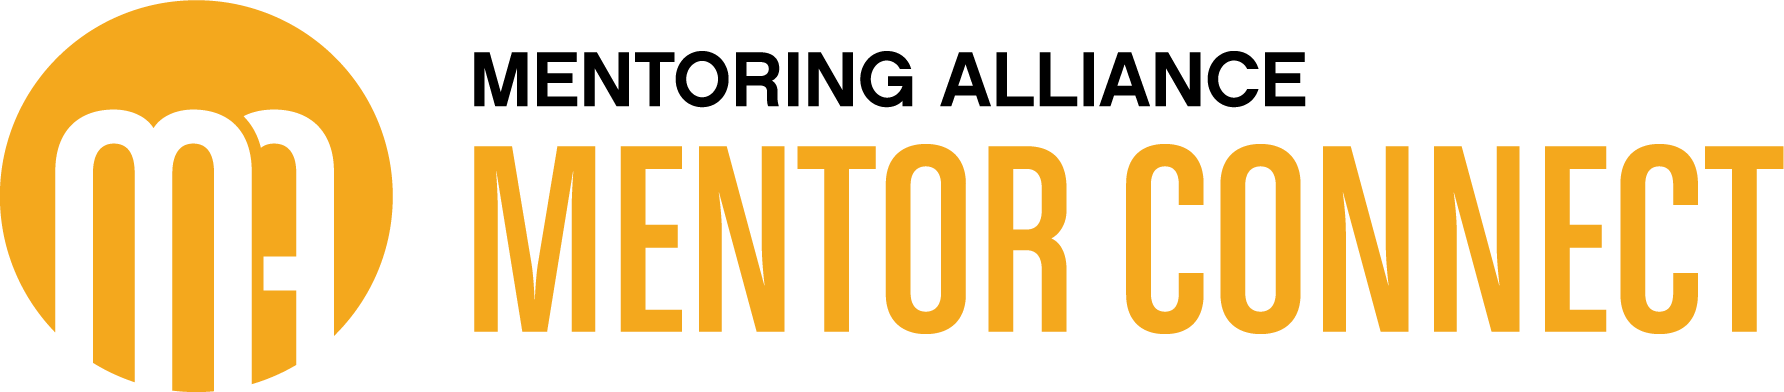 ma-mentor-connect-logo-full-color-rgb